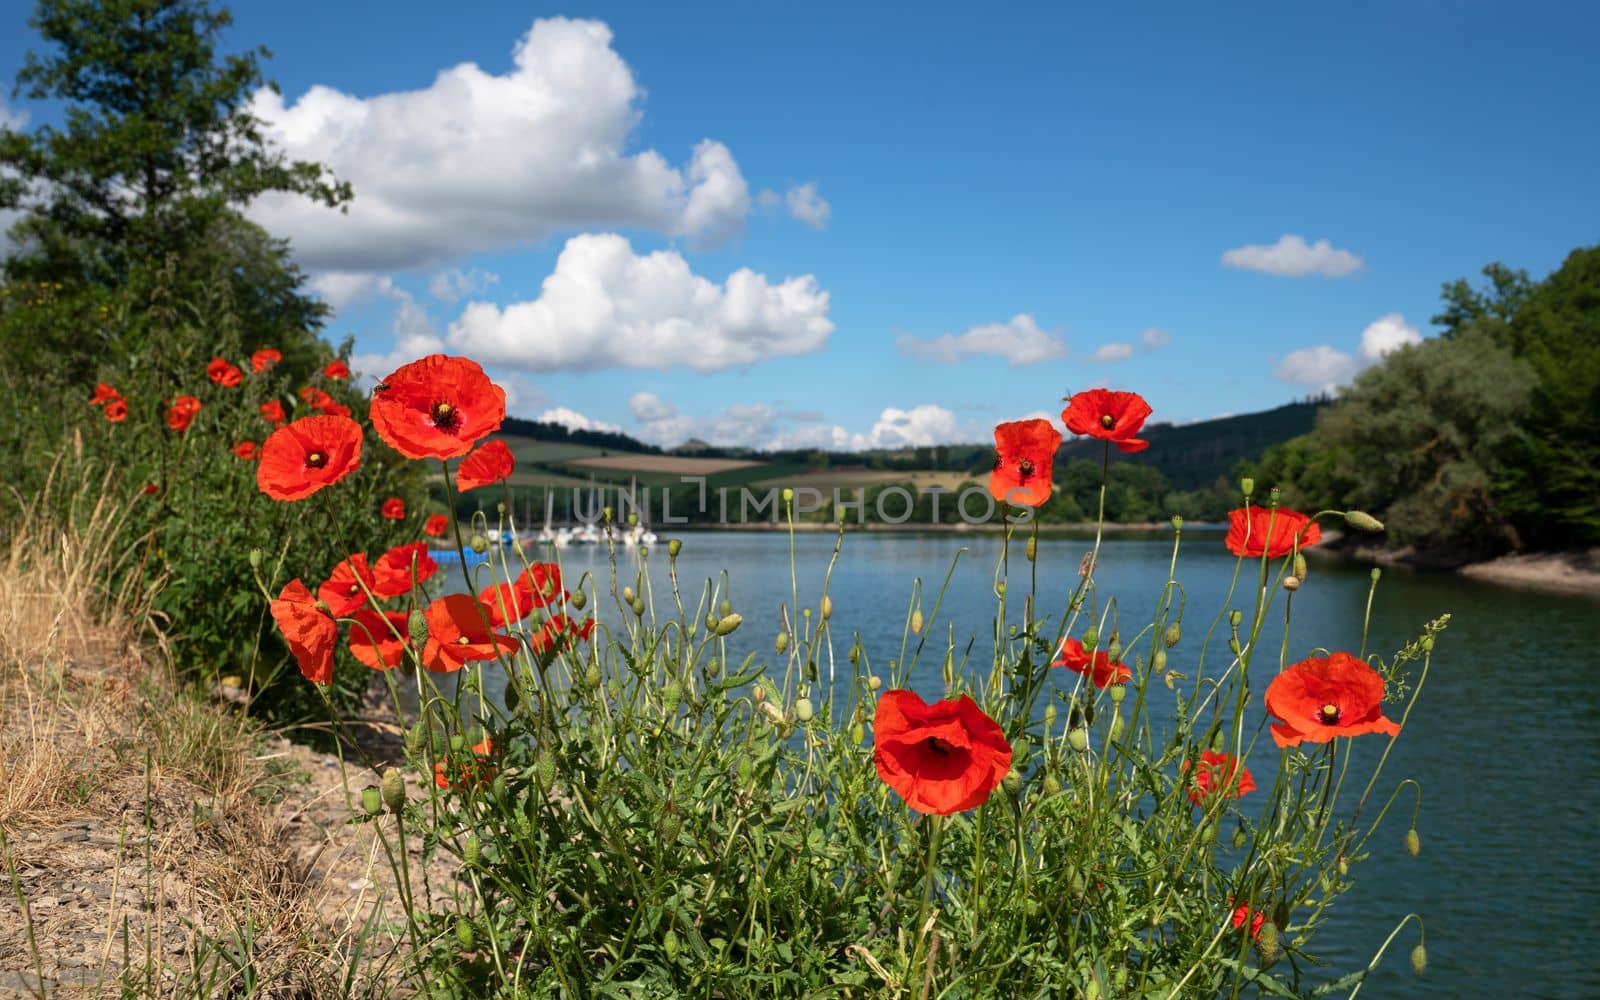 Panoramic image of Lake Diemel with blooming poppies in the foreground, Sauerland, Germany